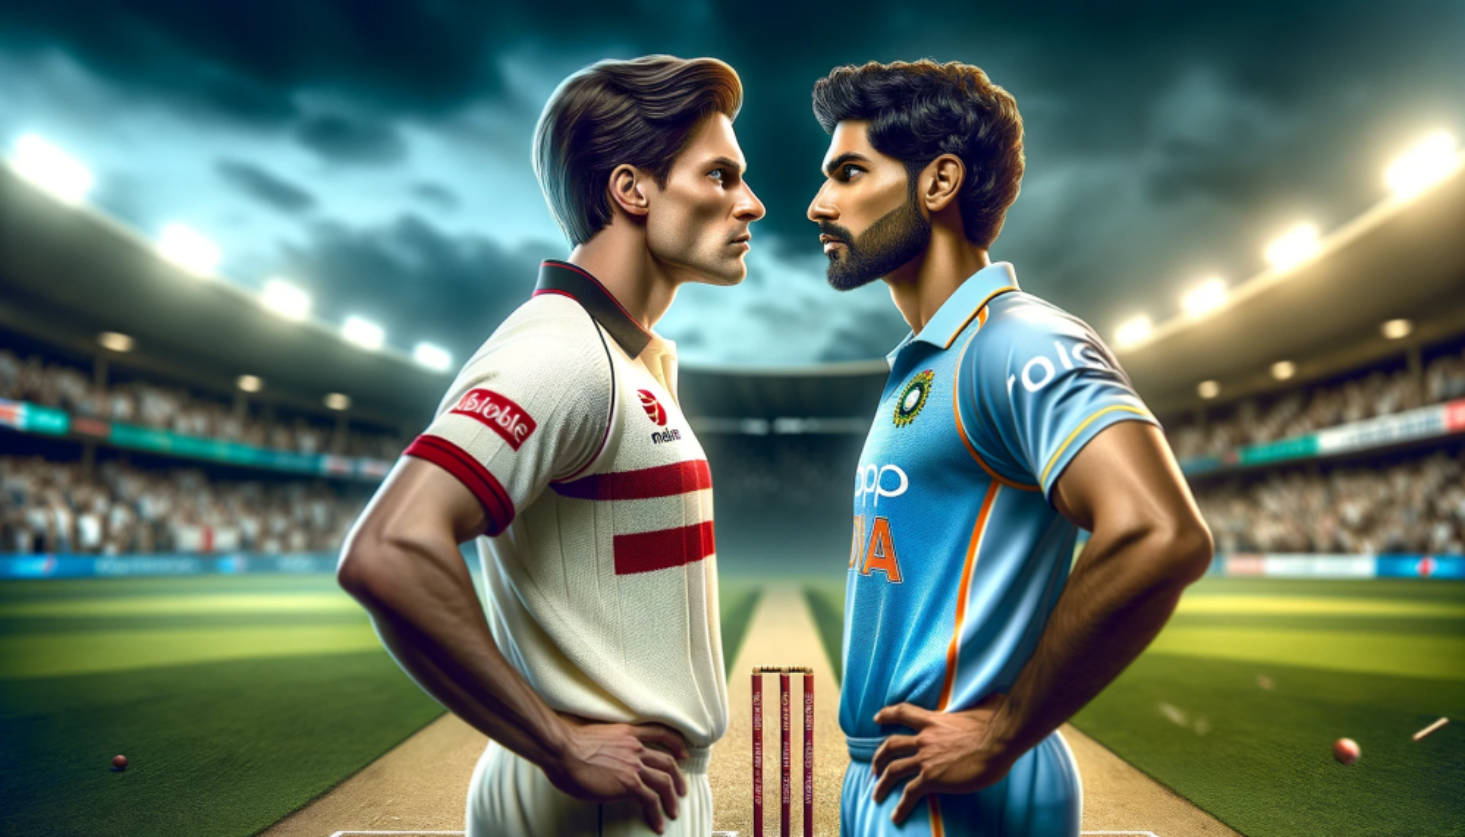 What Are Some Iconic Cricket Rivalries